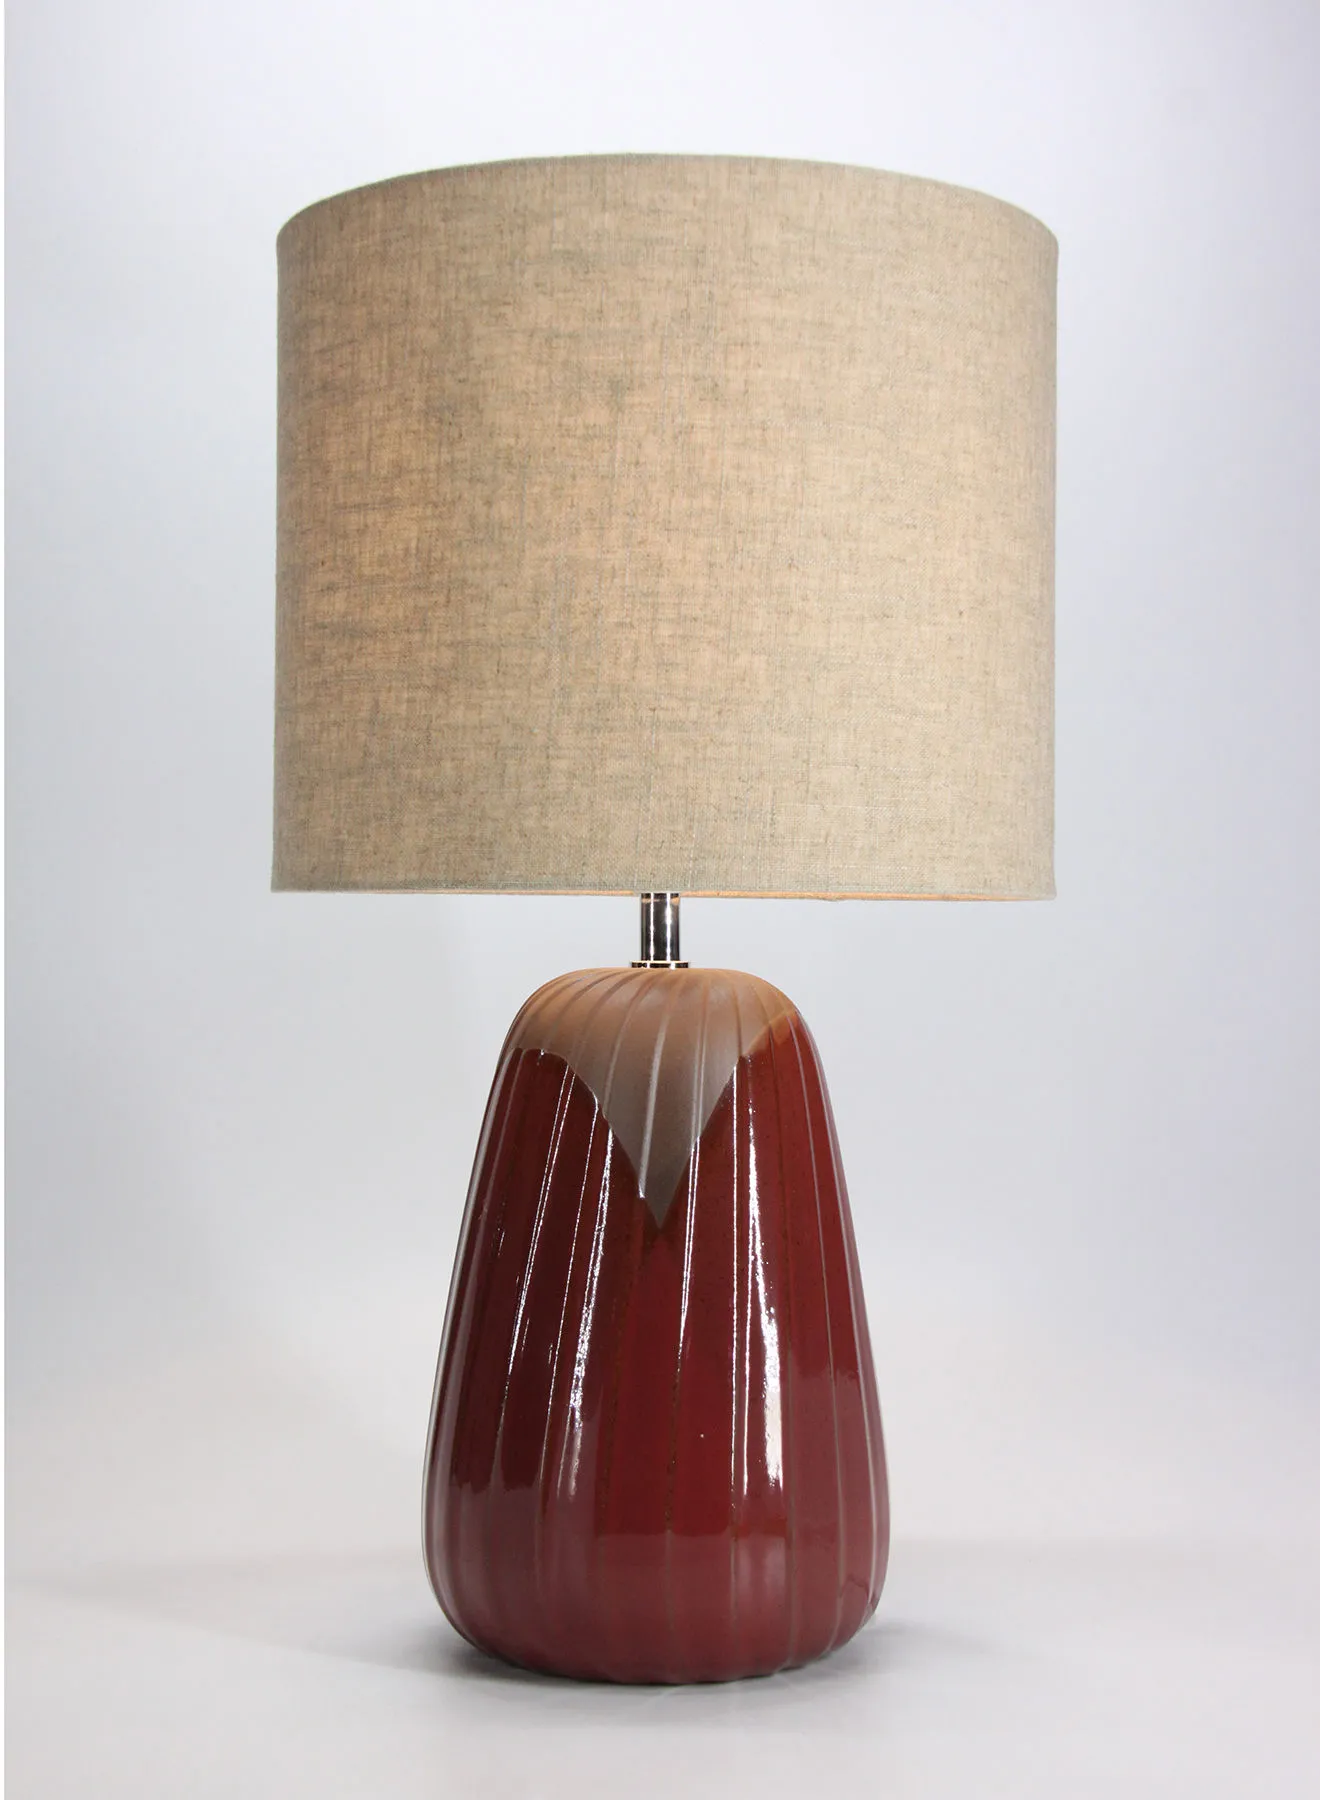 ebb & flow Burnt Ceramic Table Lamp | Lampshade Unique Luxury Quality Material for the Perfect Stylish Home D181-123 Red 30 x 30 x 52.8